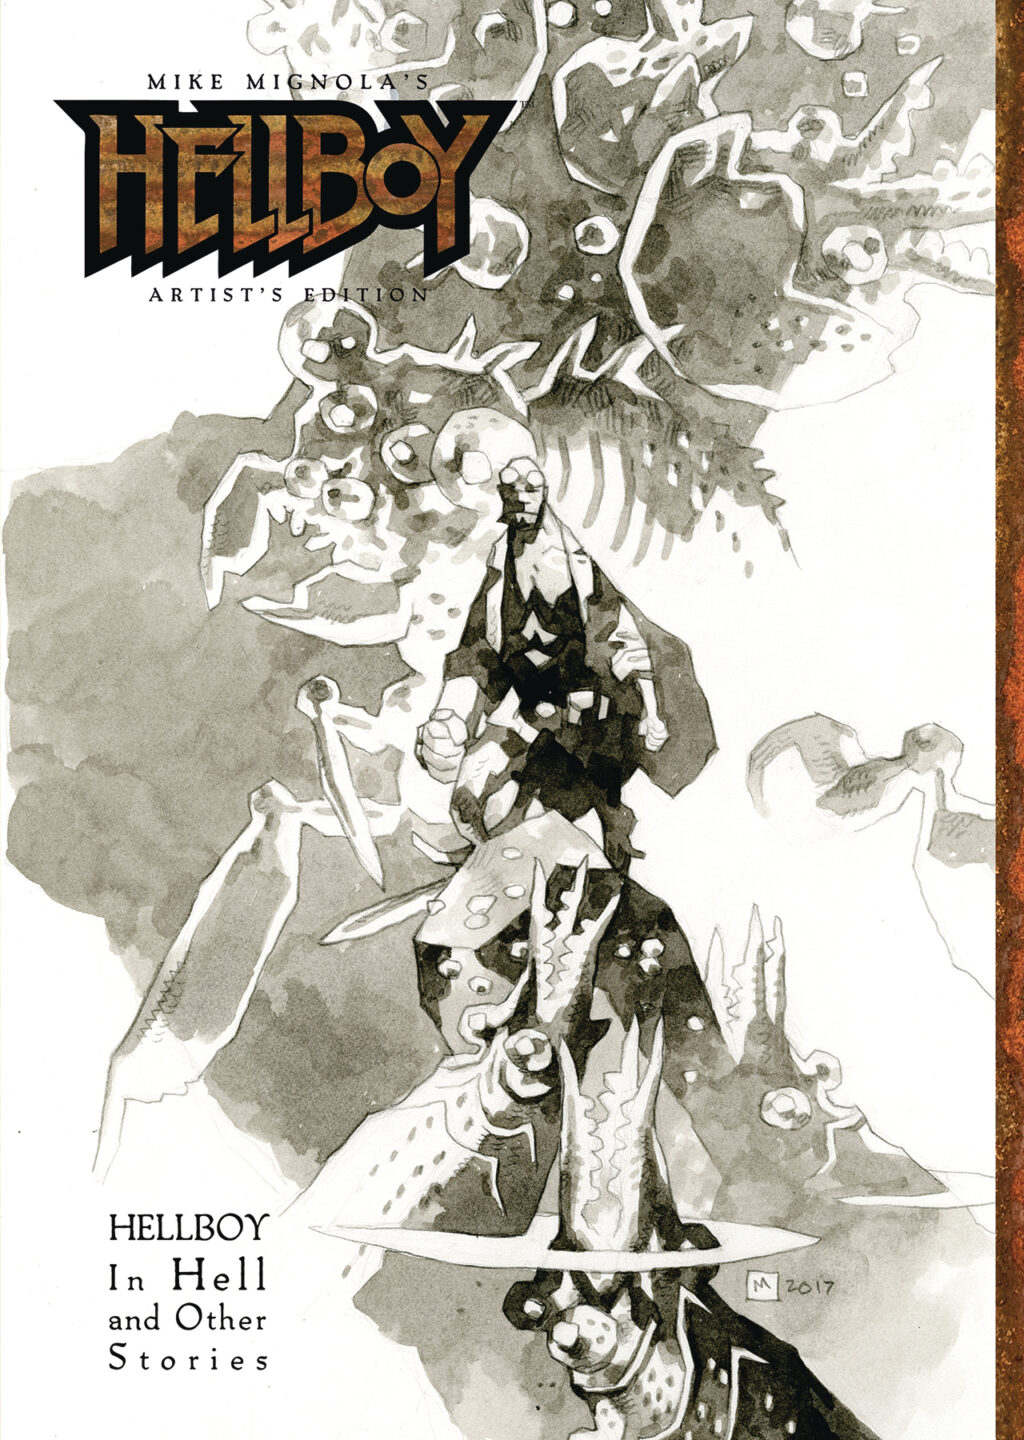 Hellboy In Hell and Other Stories Artist's Edition New Printing cover prelim